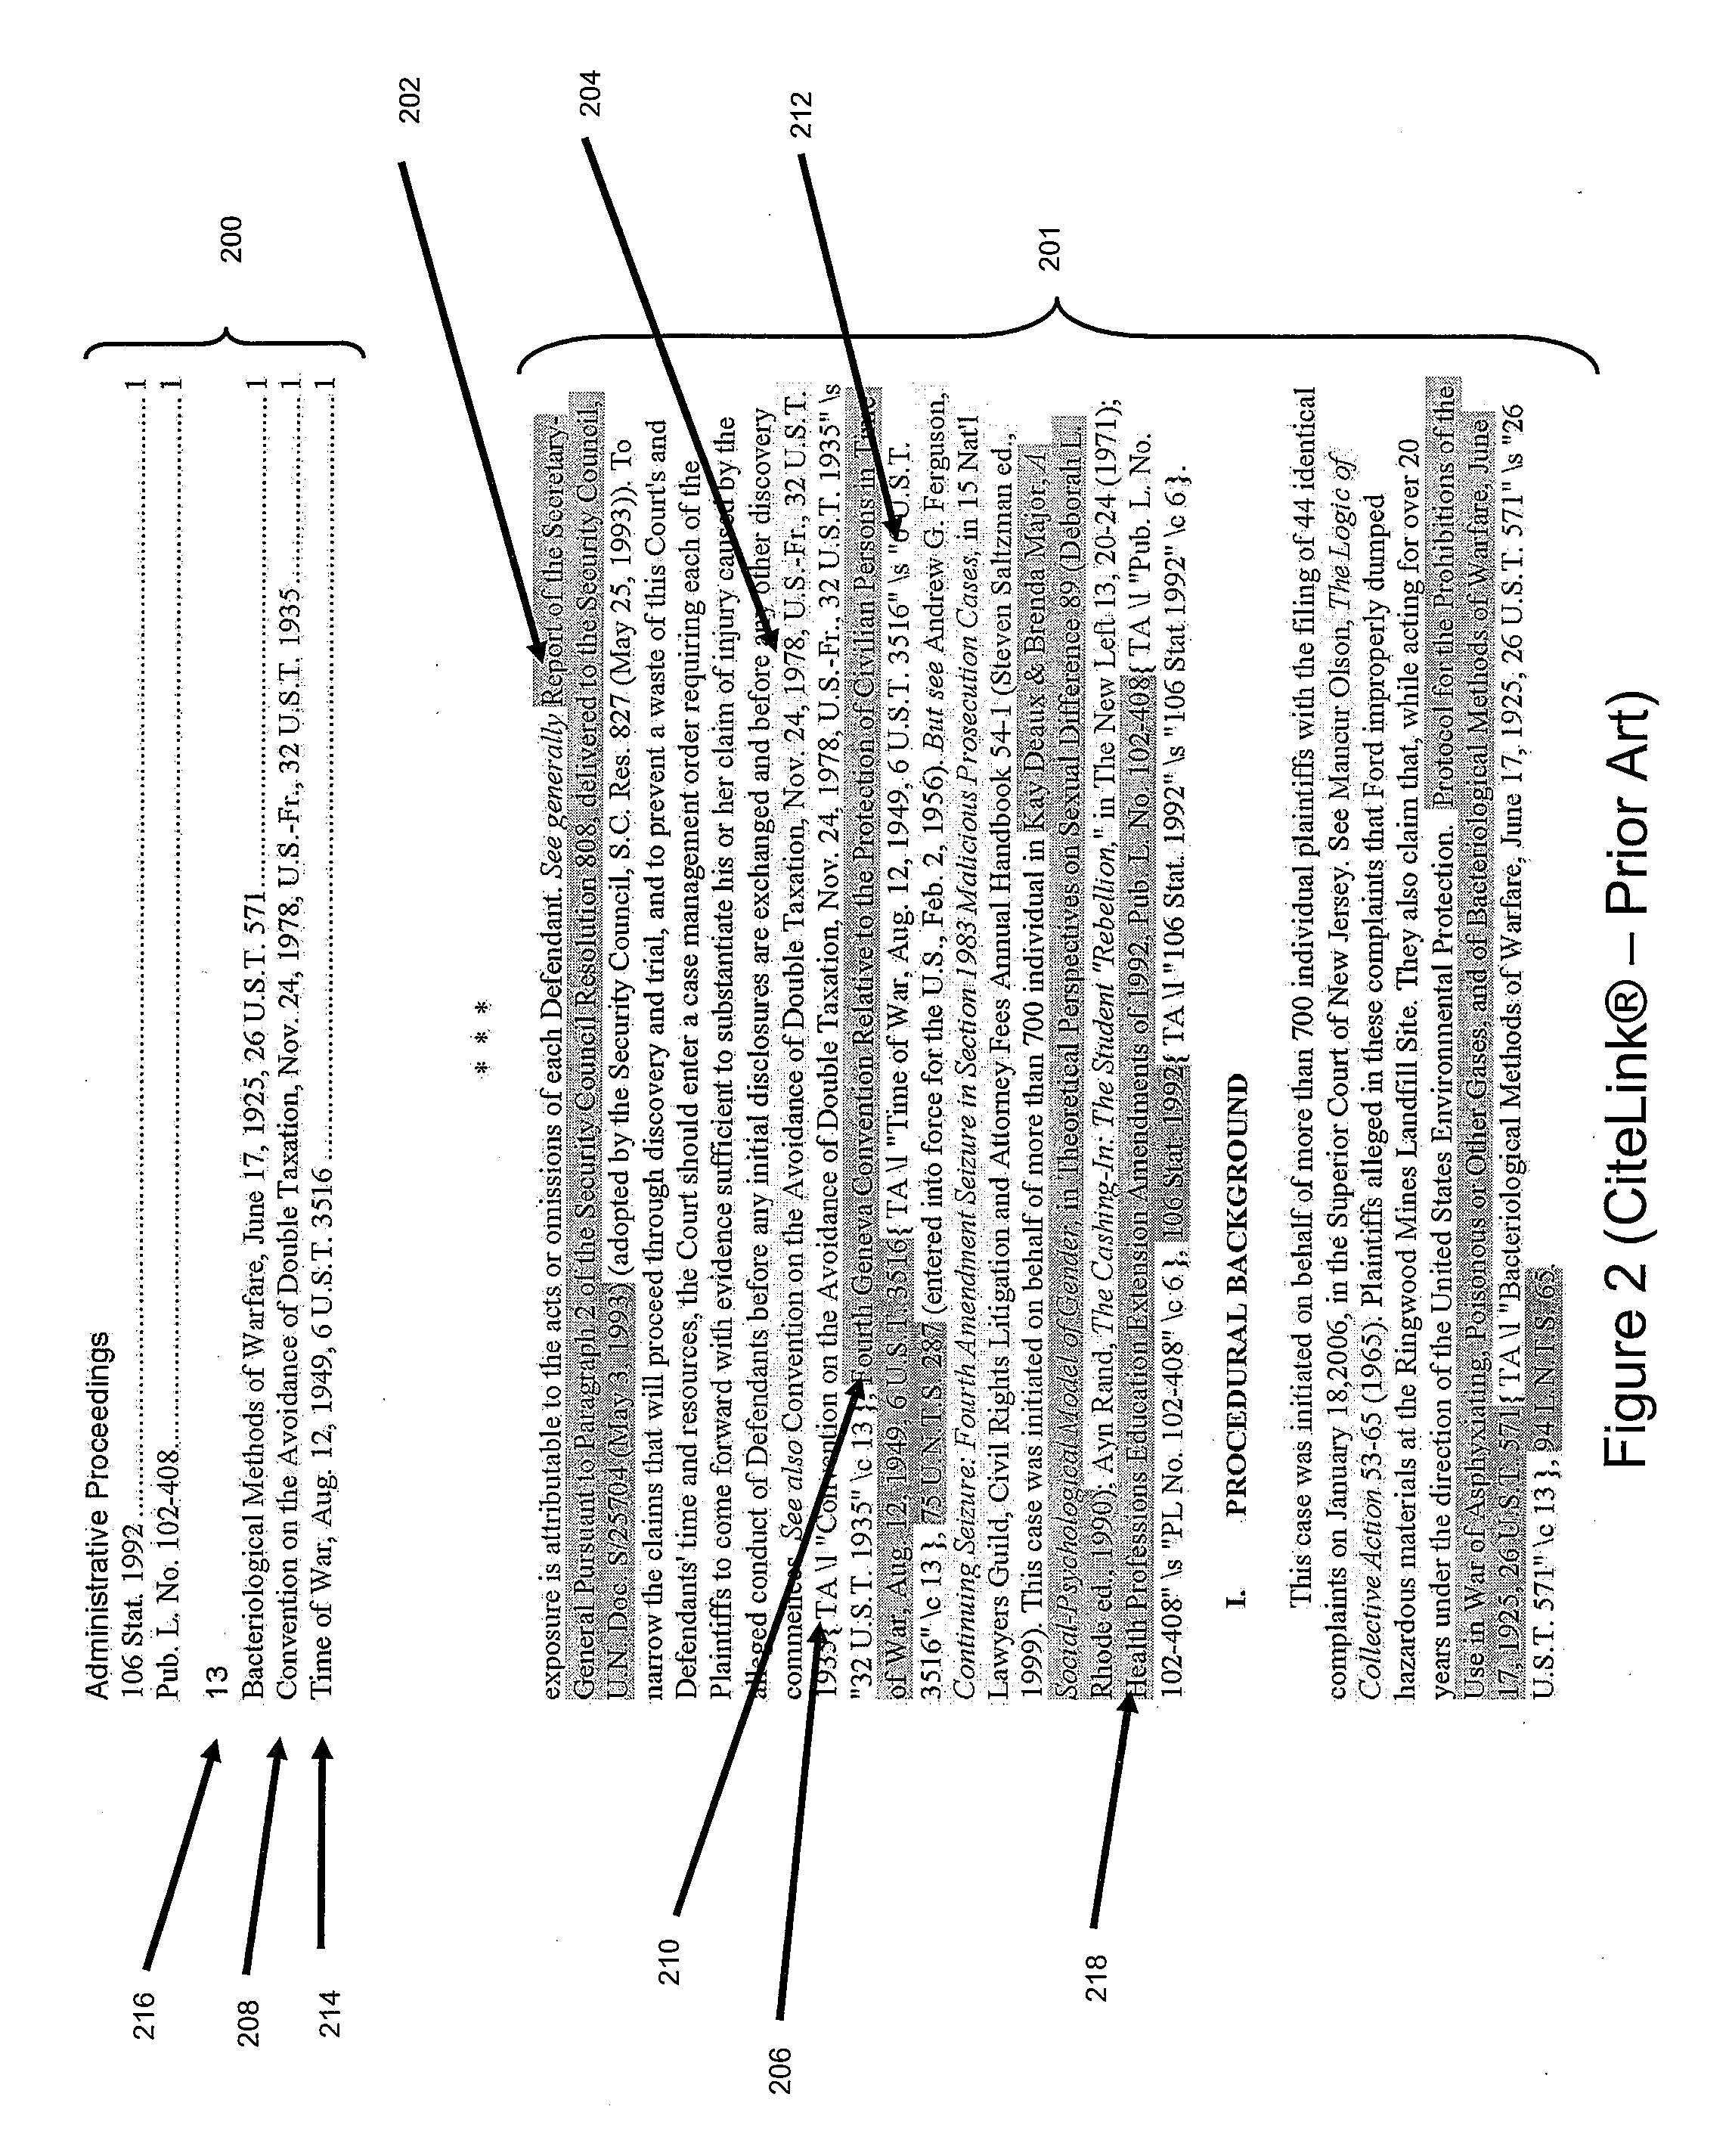 System and method for determining valid citation patterns in electronic documents